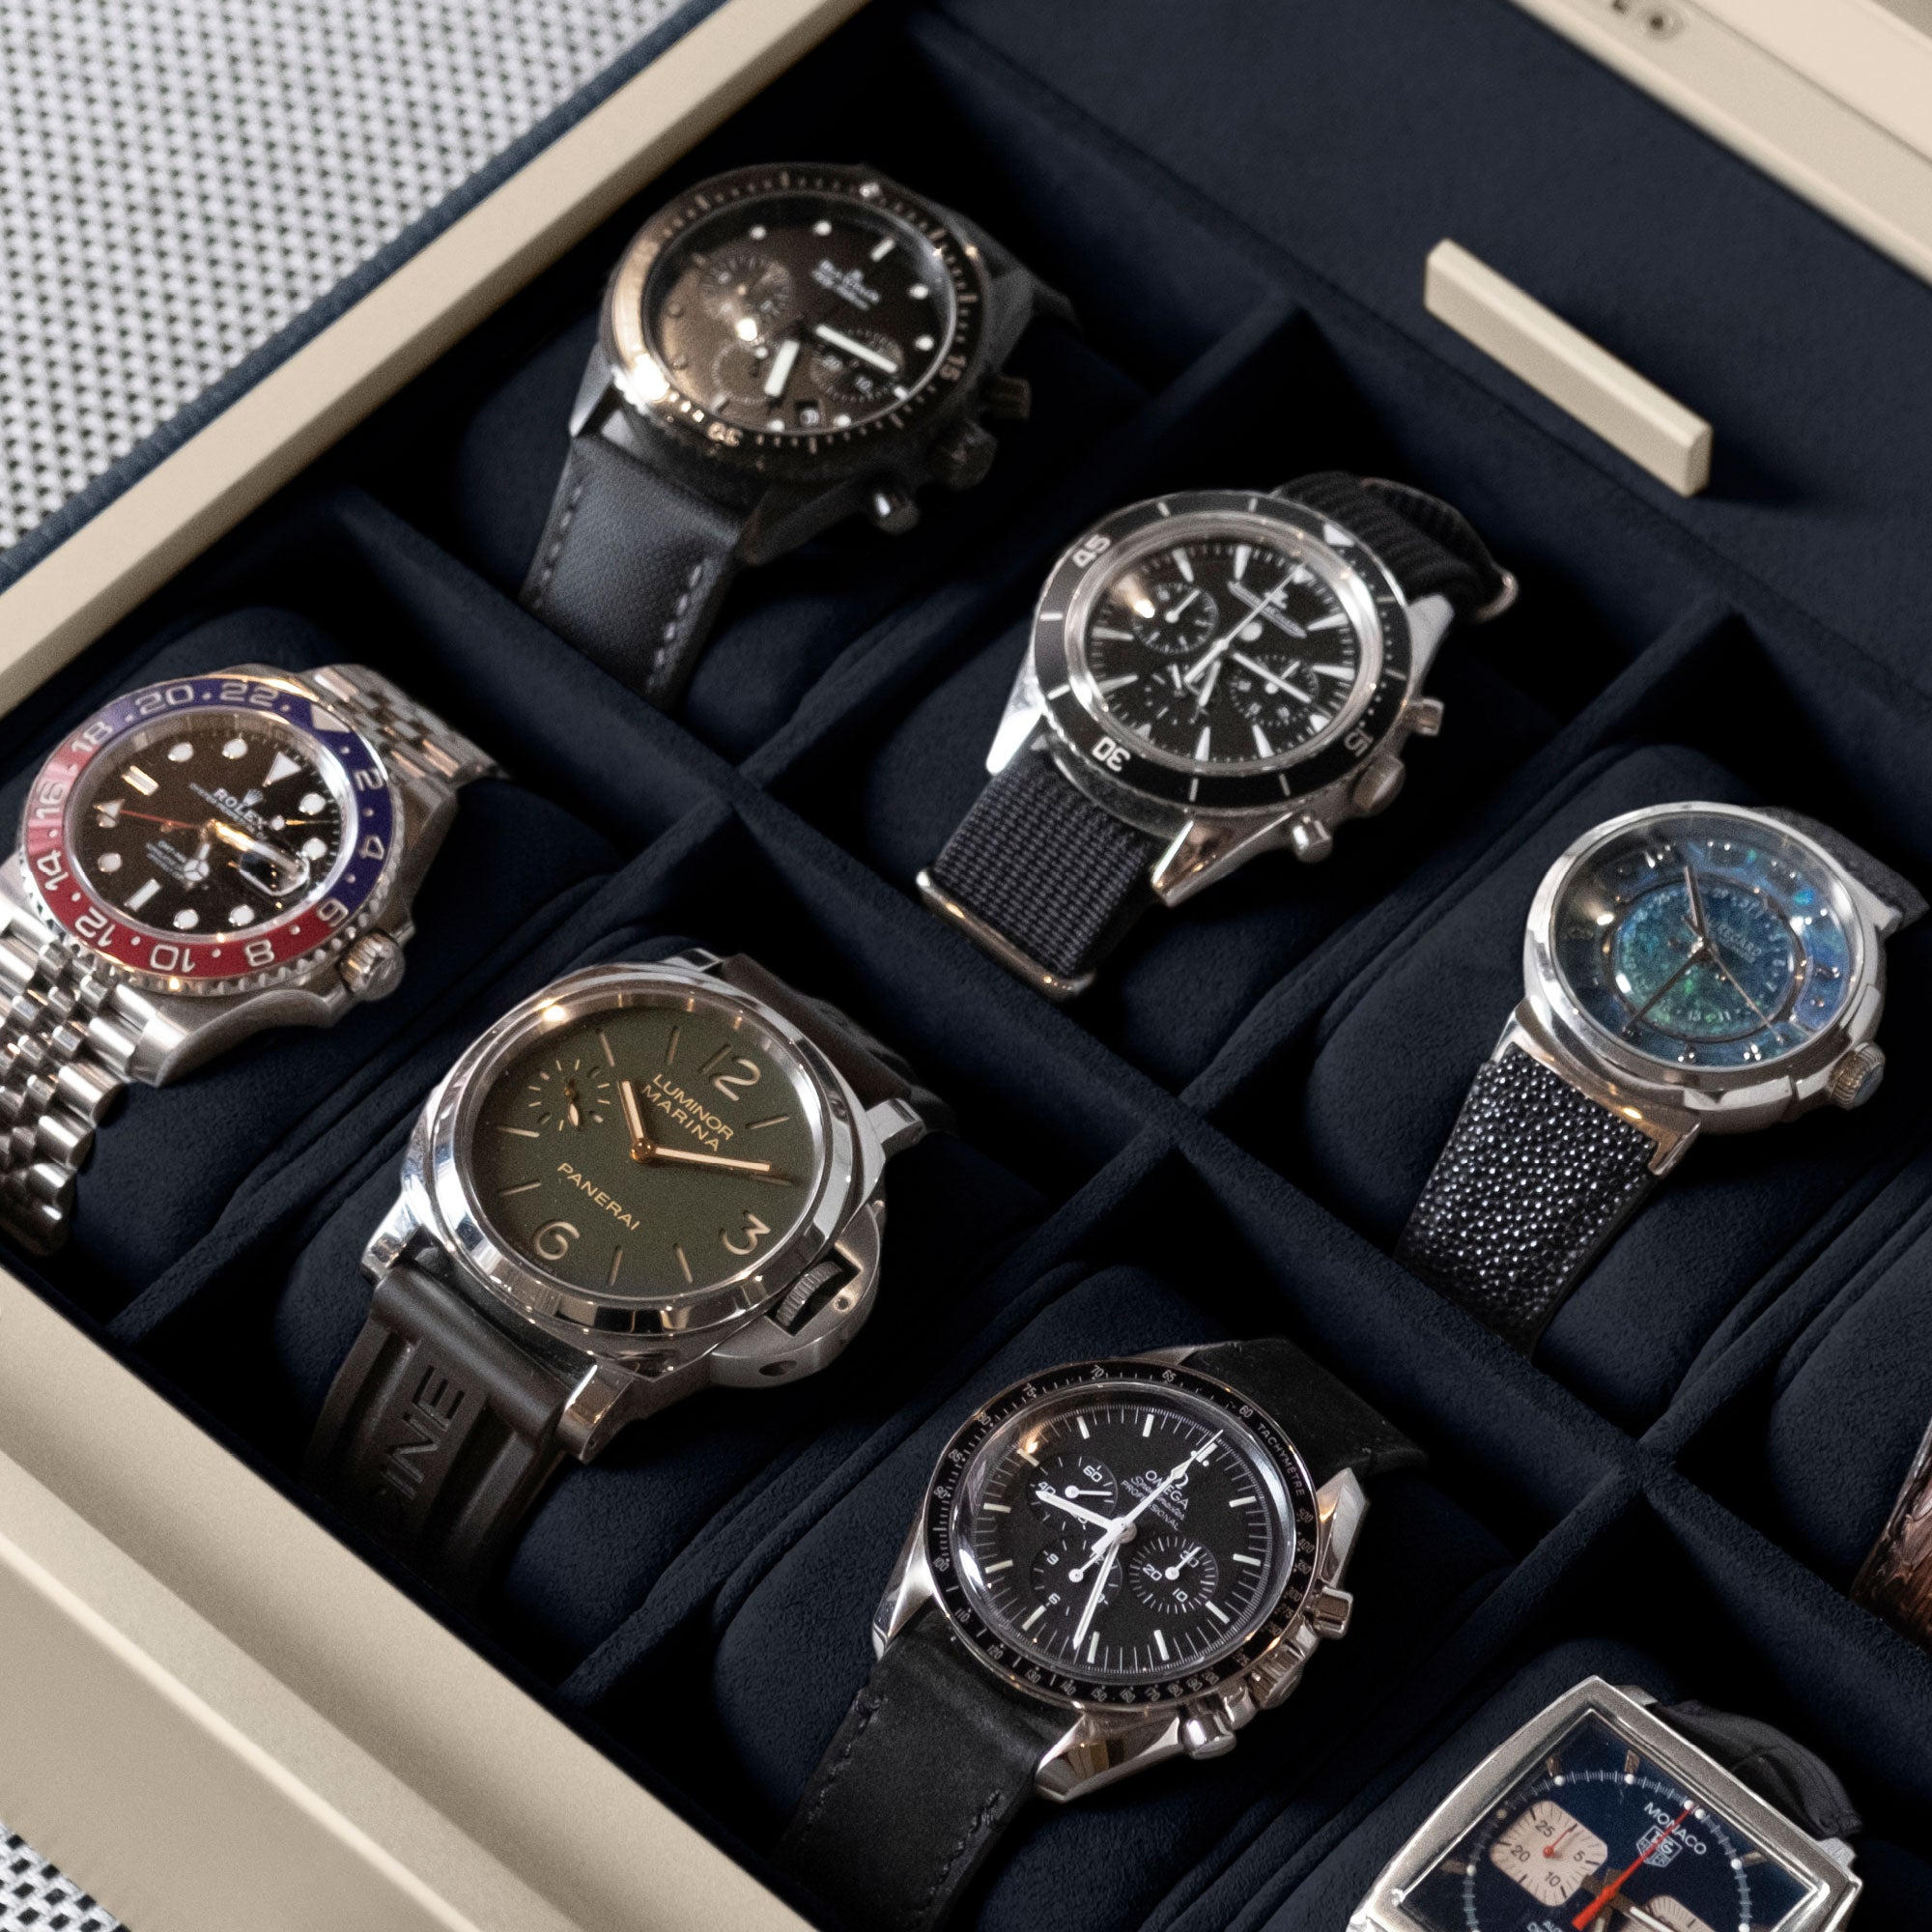 Detail photo of luxury watches displayed in a Spence 12 Watch box in deeo blue interior and marine leather